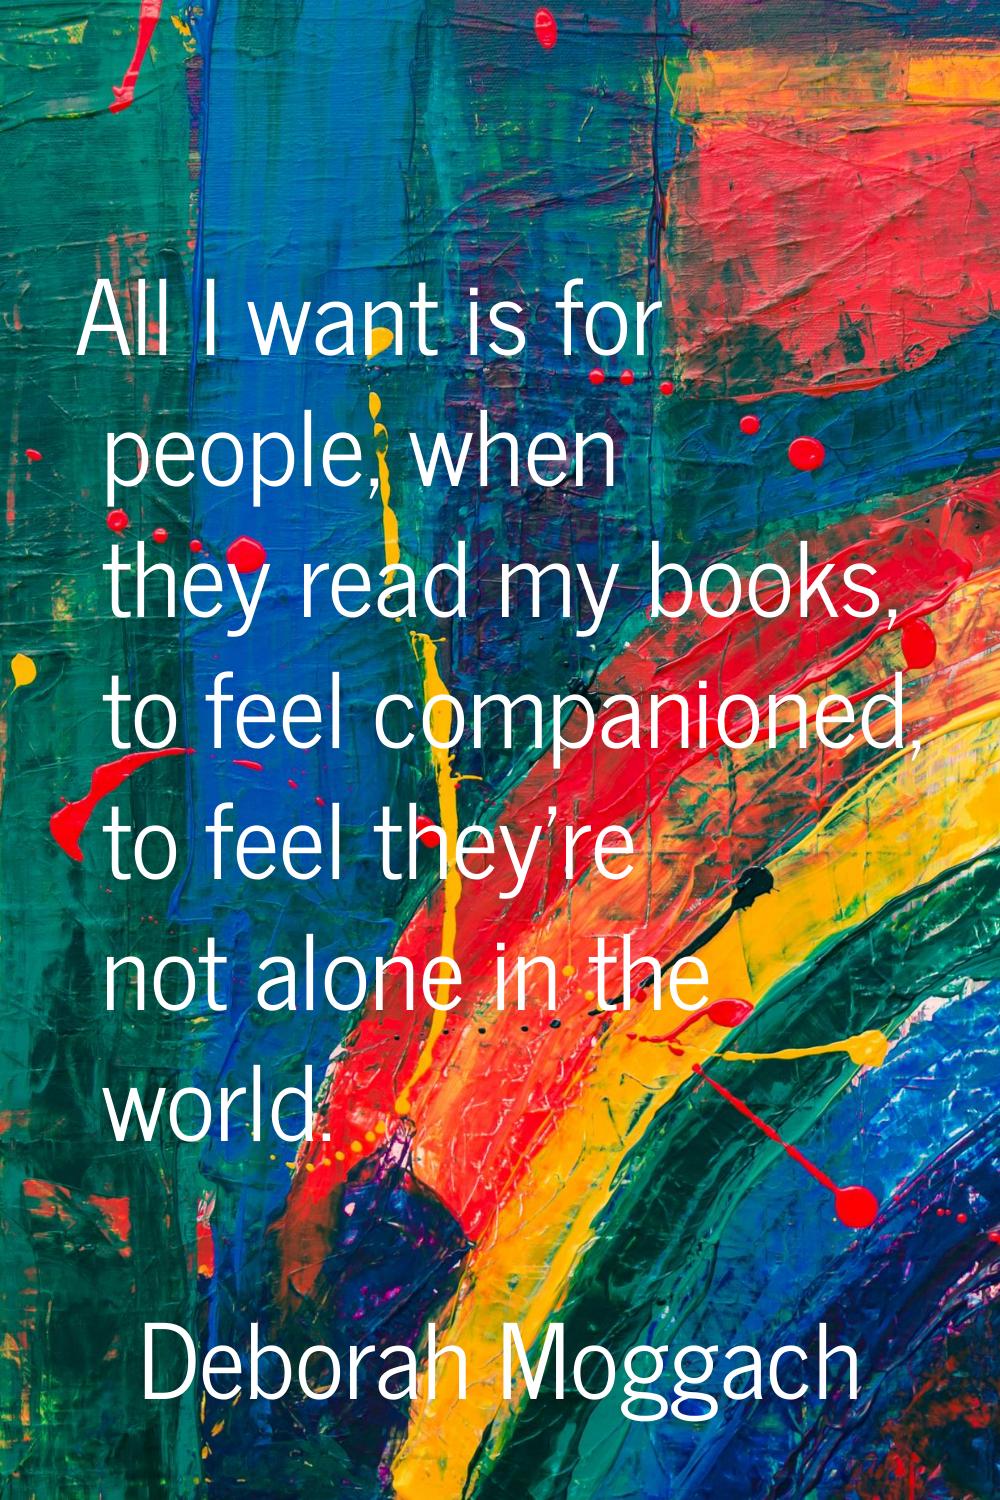 All I want is for people, when they read my books, to feel companioned, to feel they're not alone i